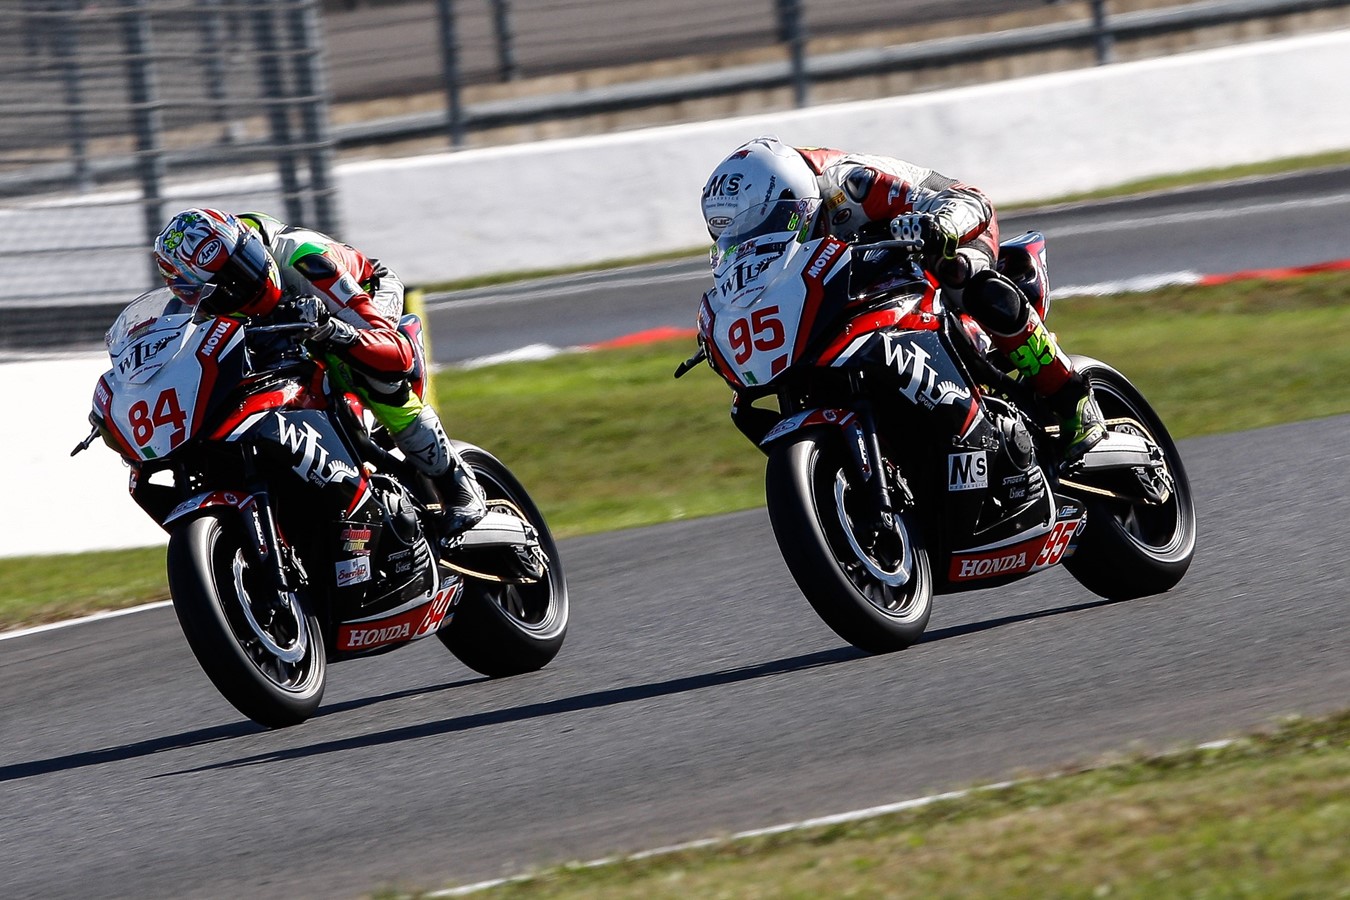 Grassia takes crucial maiden EJC win at Magny-Cours